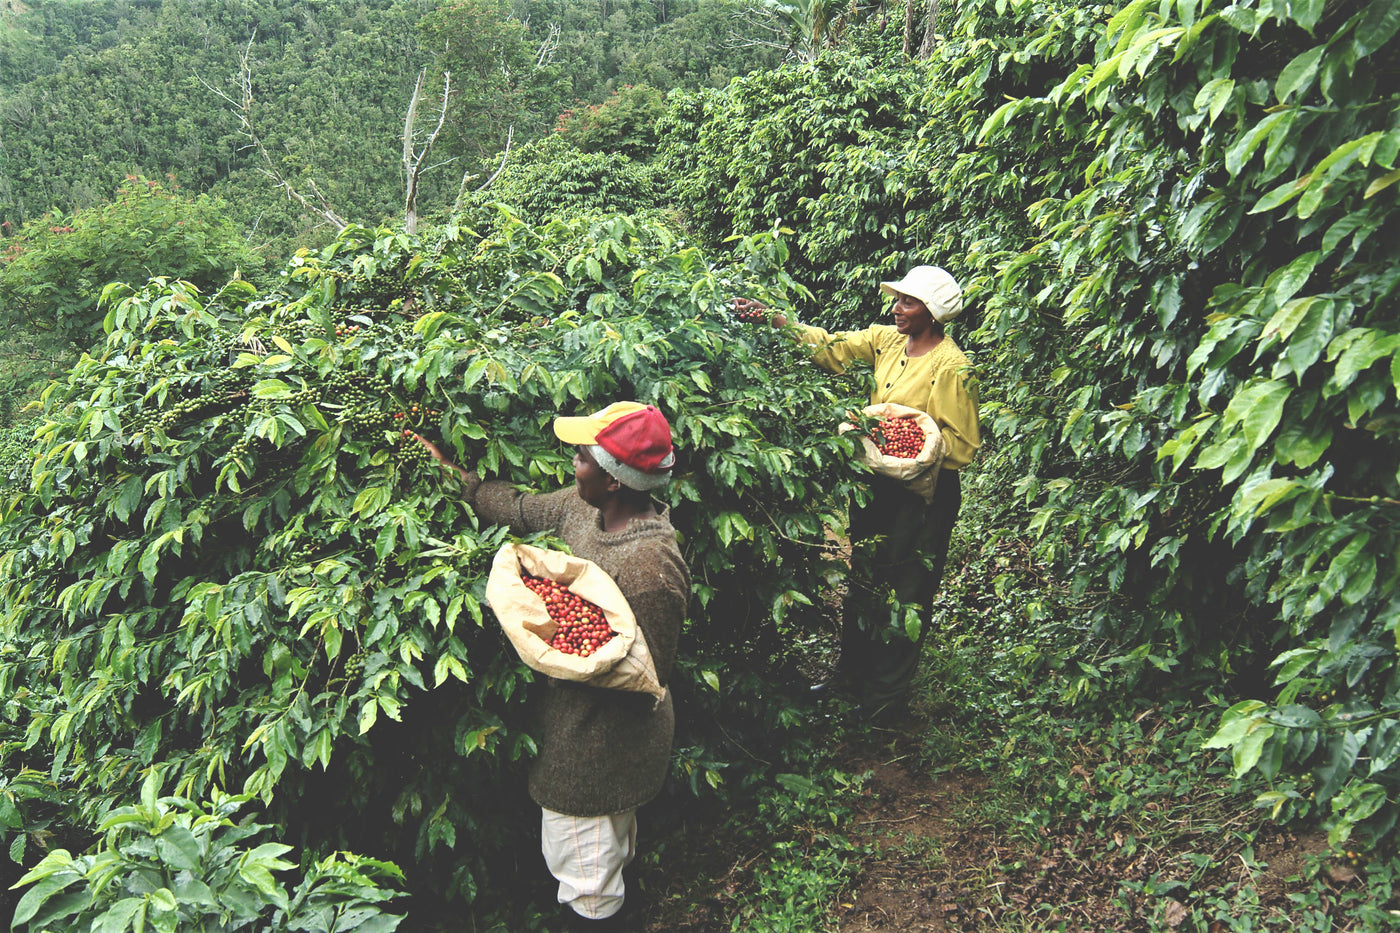 Farm workers picking coffee cherries from coffee plants in the Jamaican Blue Mountains